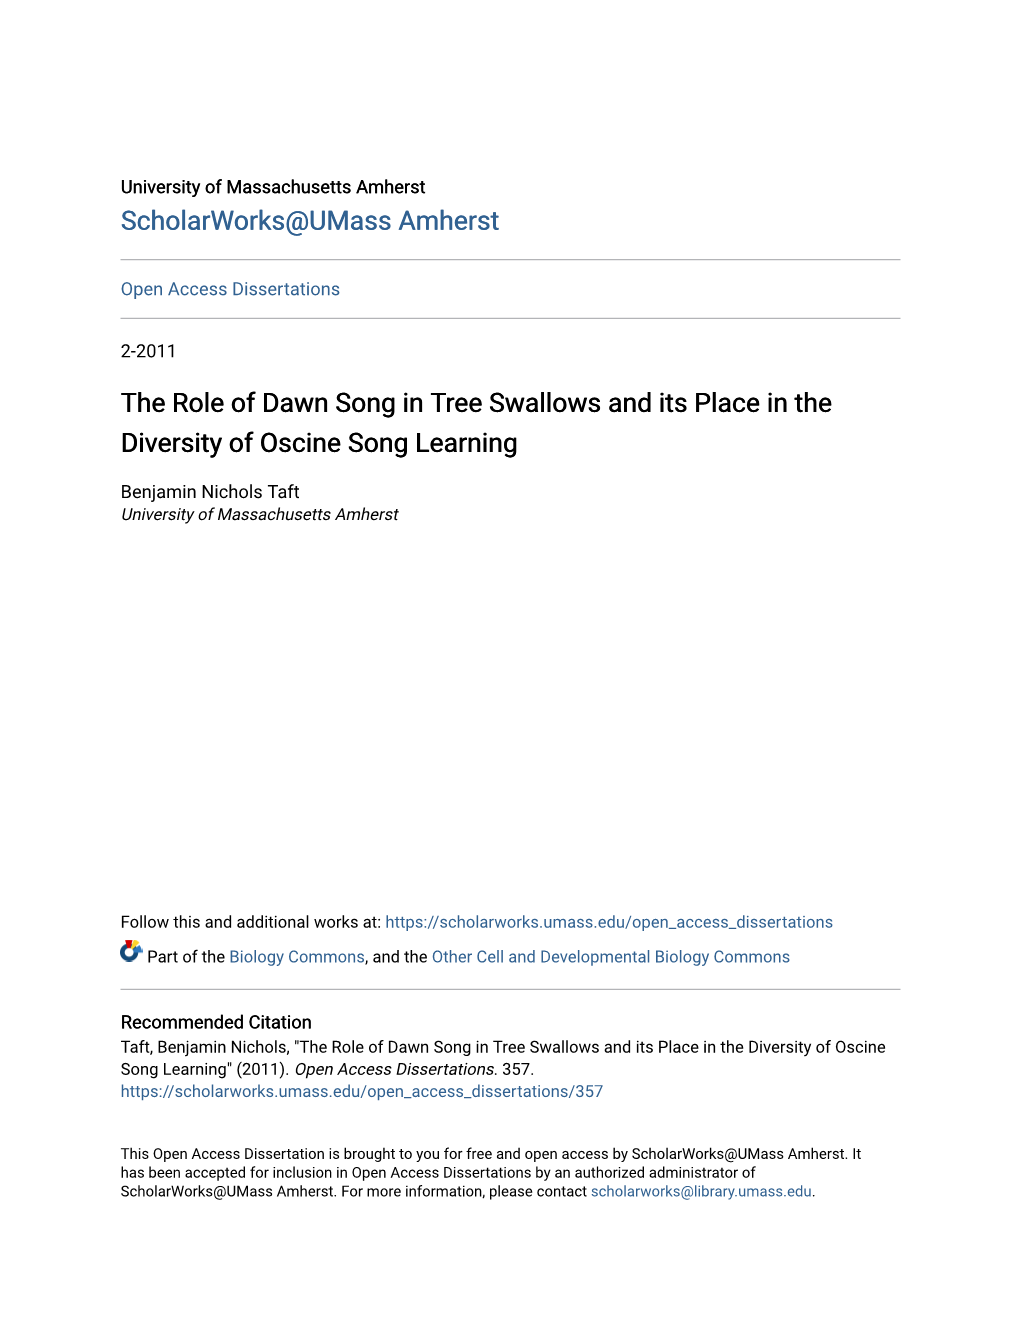 The Role of Dawn Song in Tree Swallows and Its Place in the Diversity of Oscine Song Learning